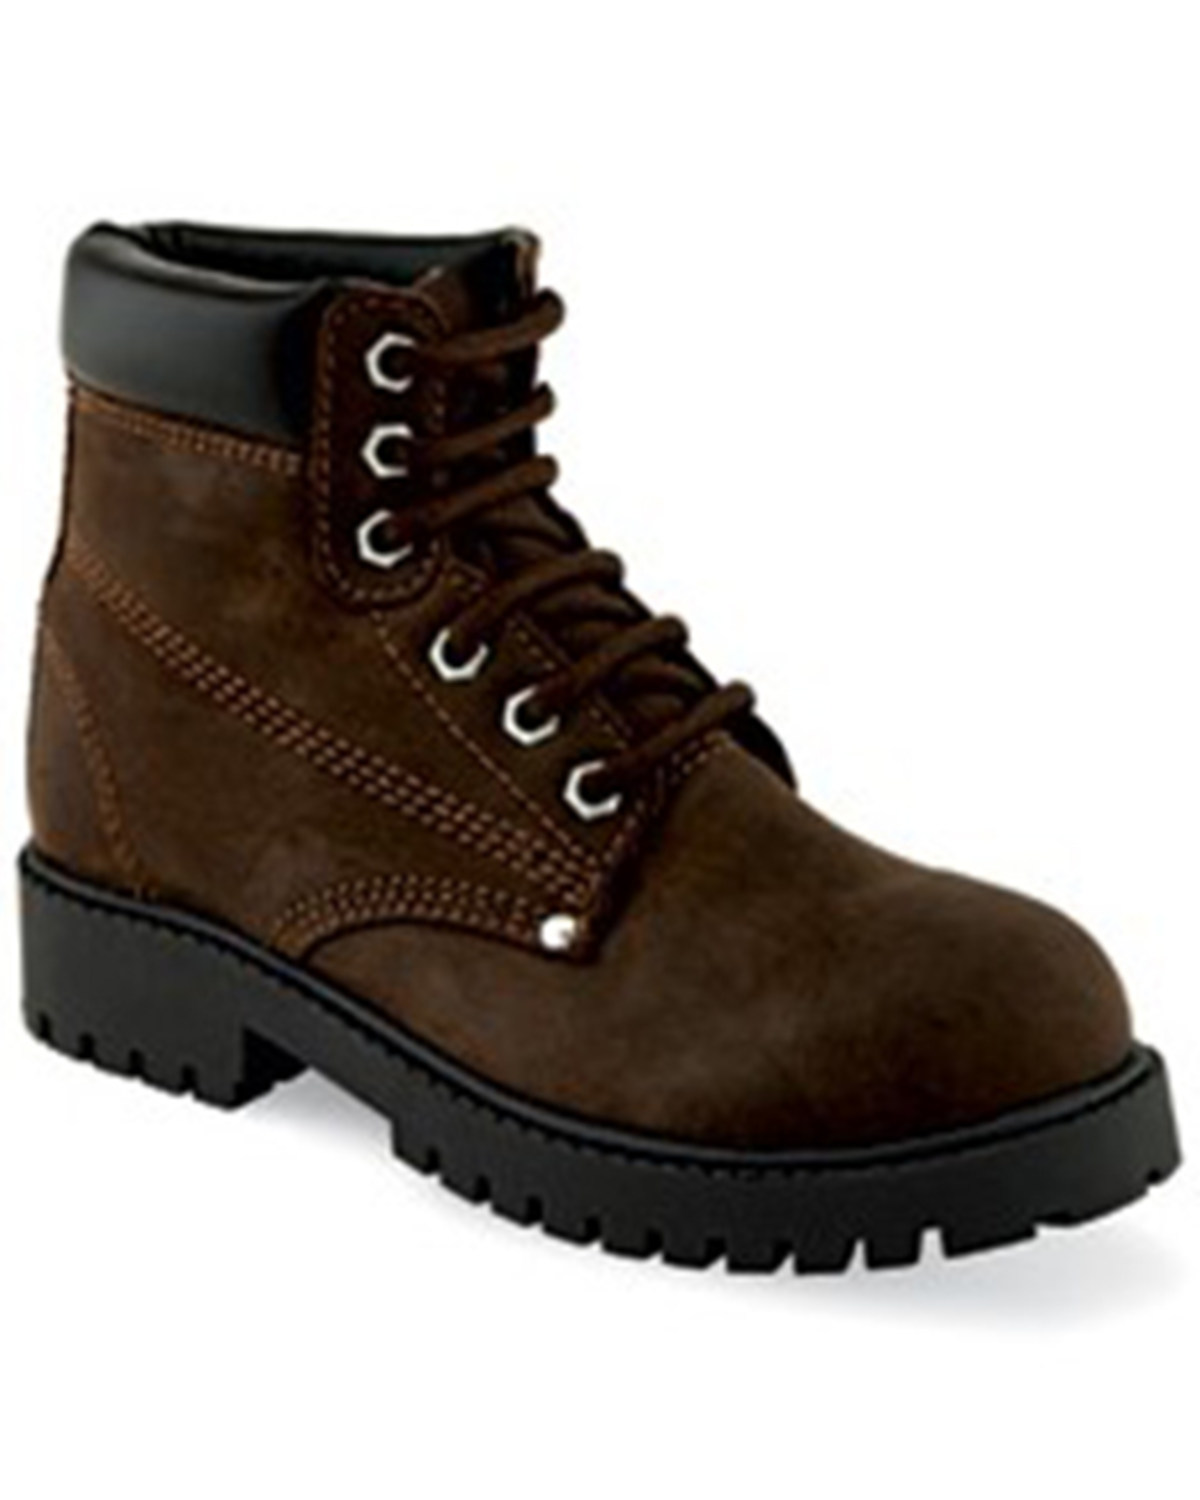 Old West Boys' Lace-Up Boots - Round Toe